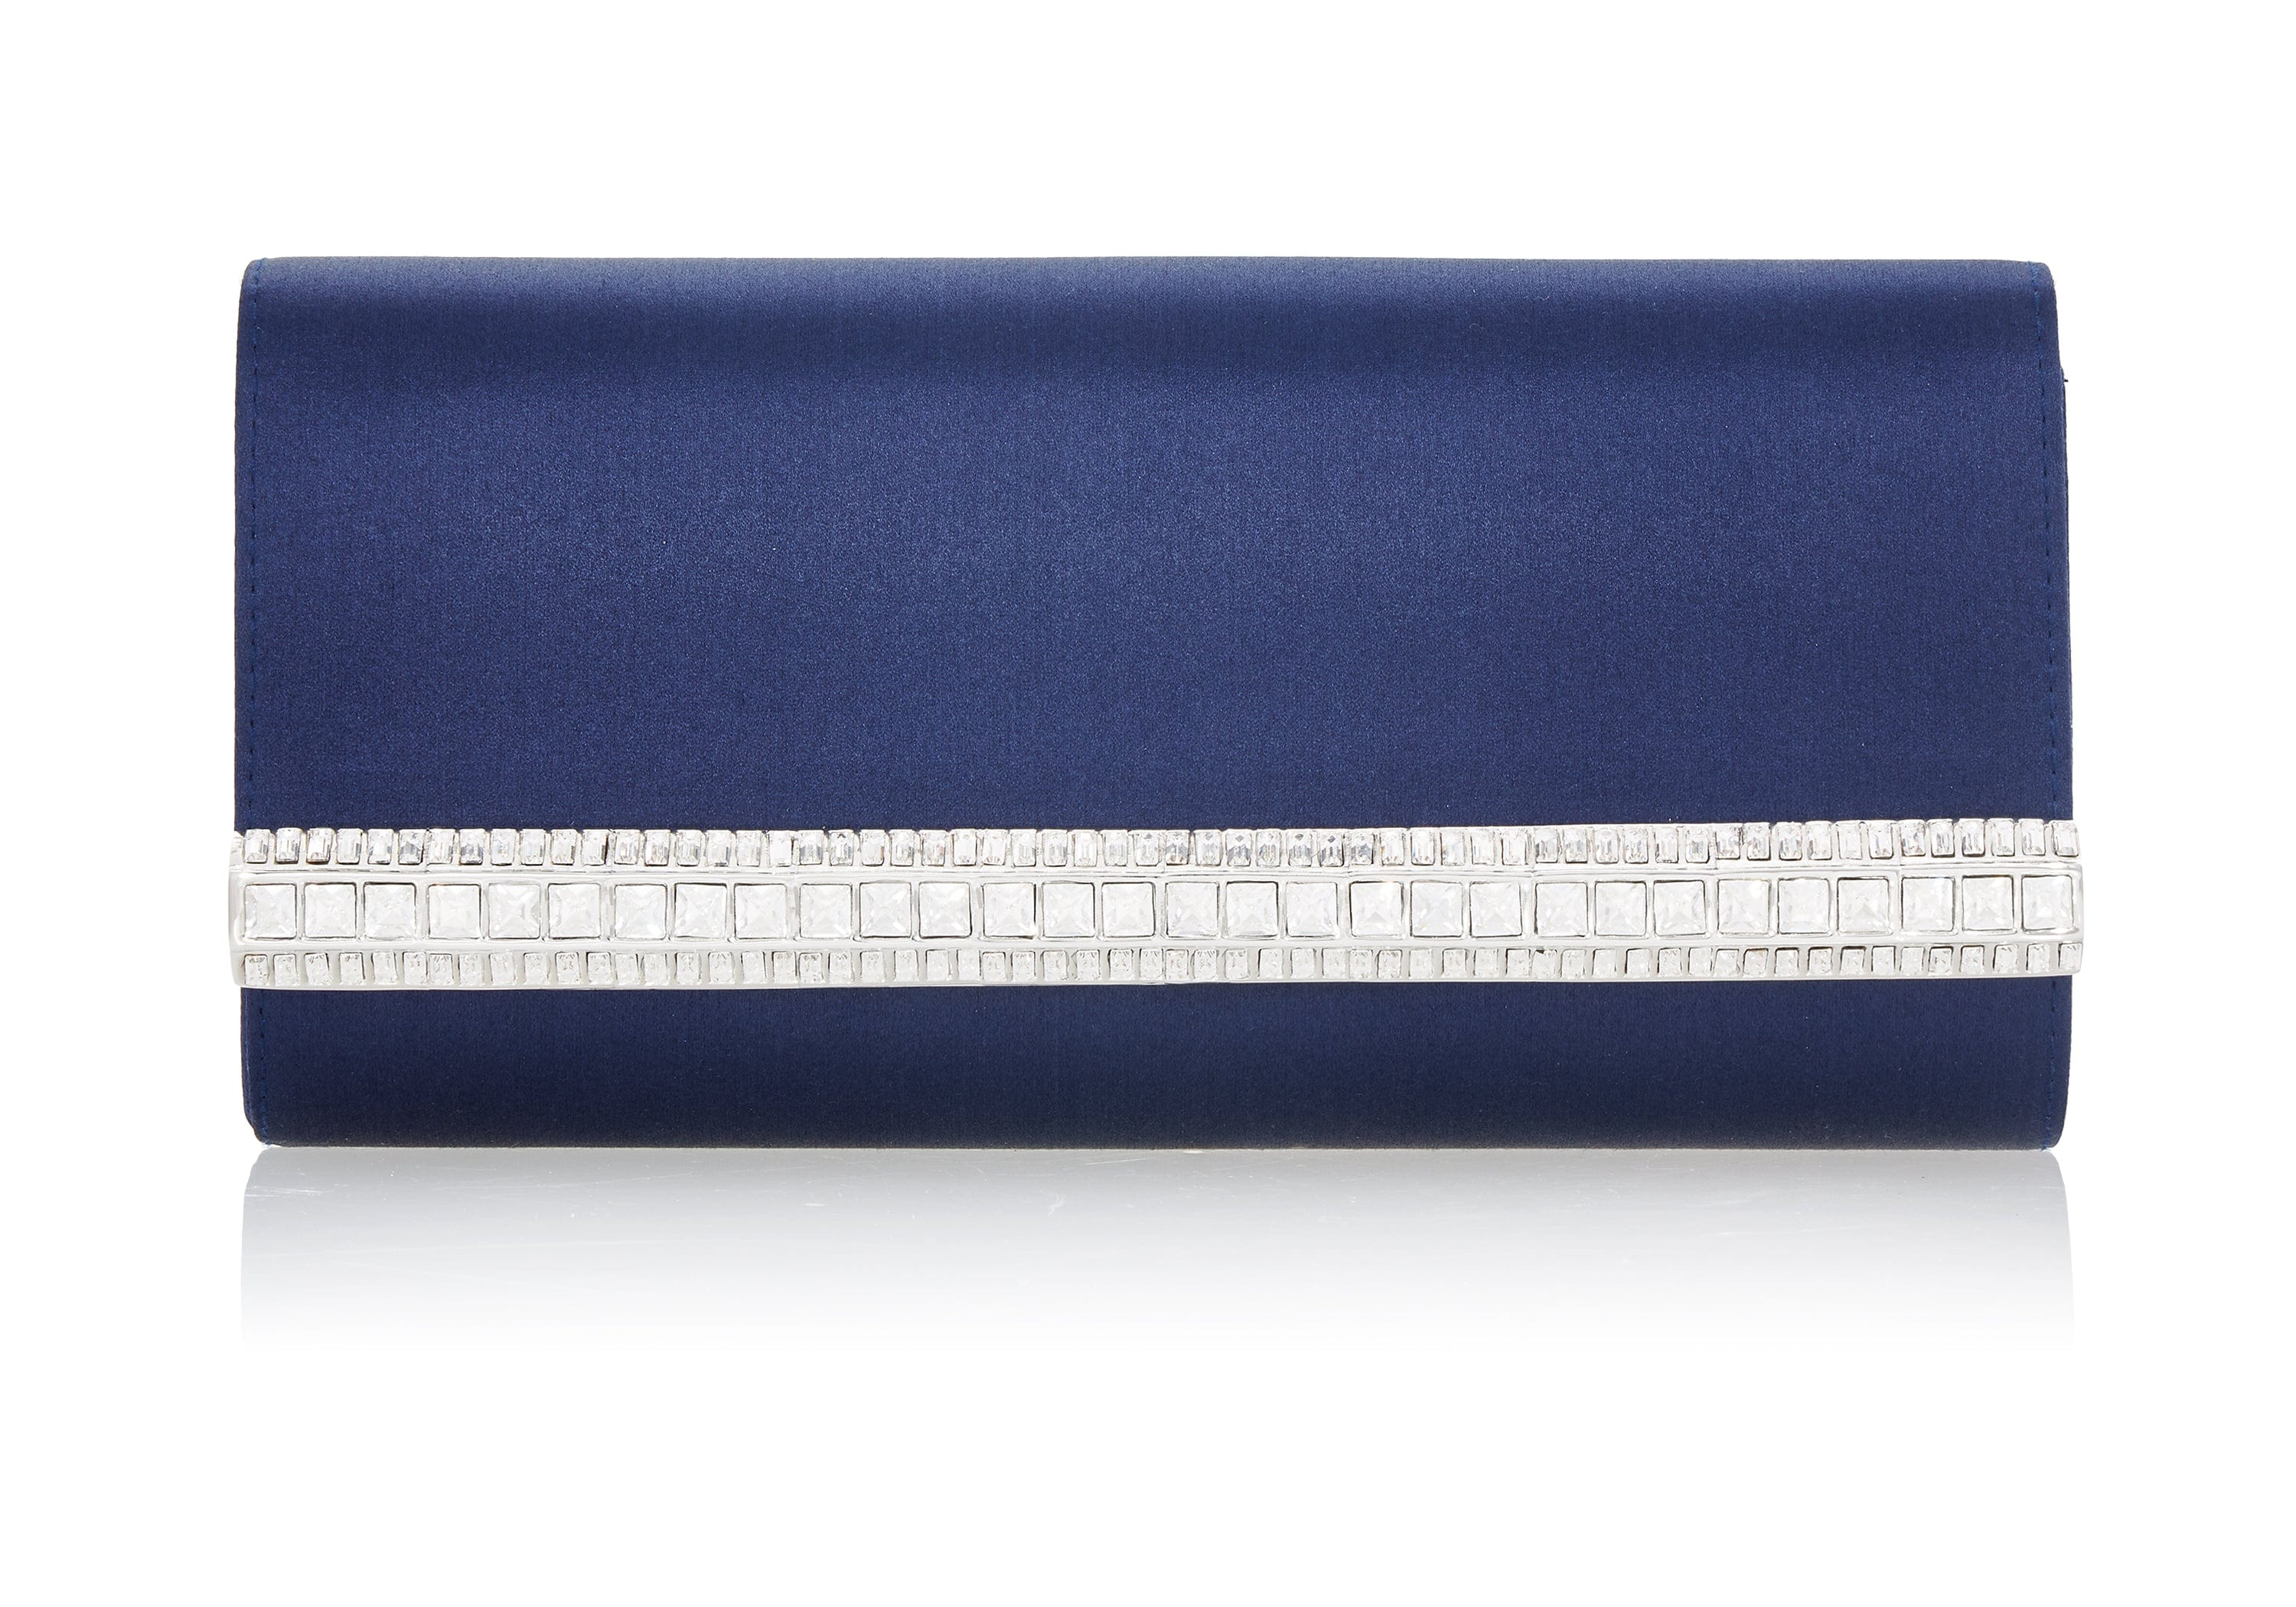 Judith Leiber Couture Crystal Bow Satin Envelope Clutch in Silver Navy